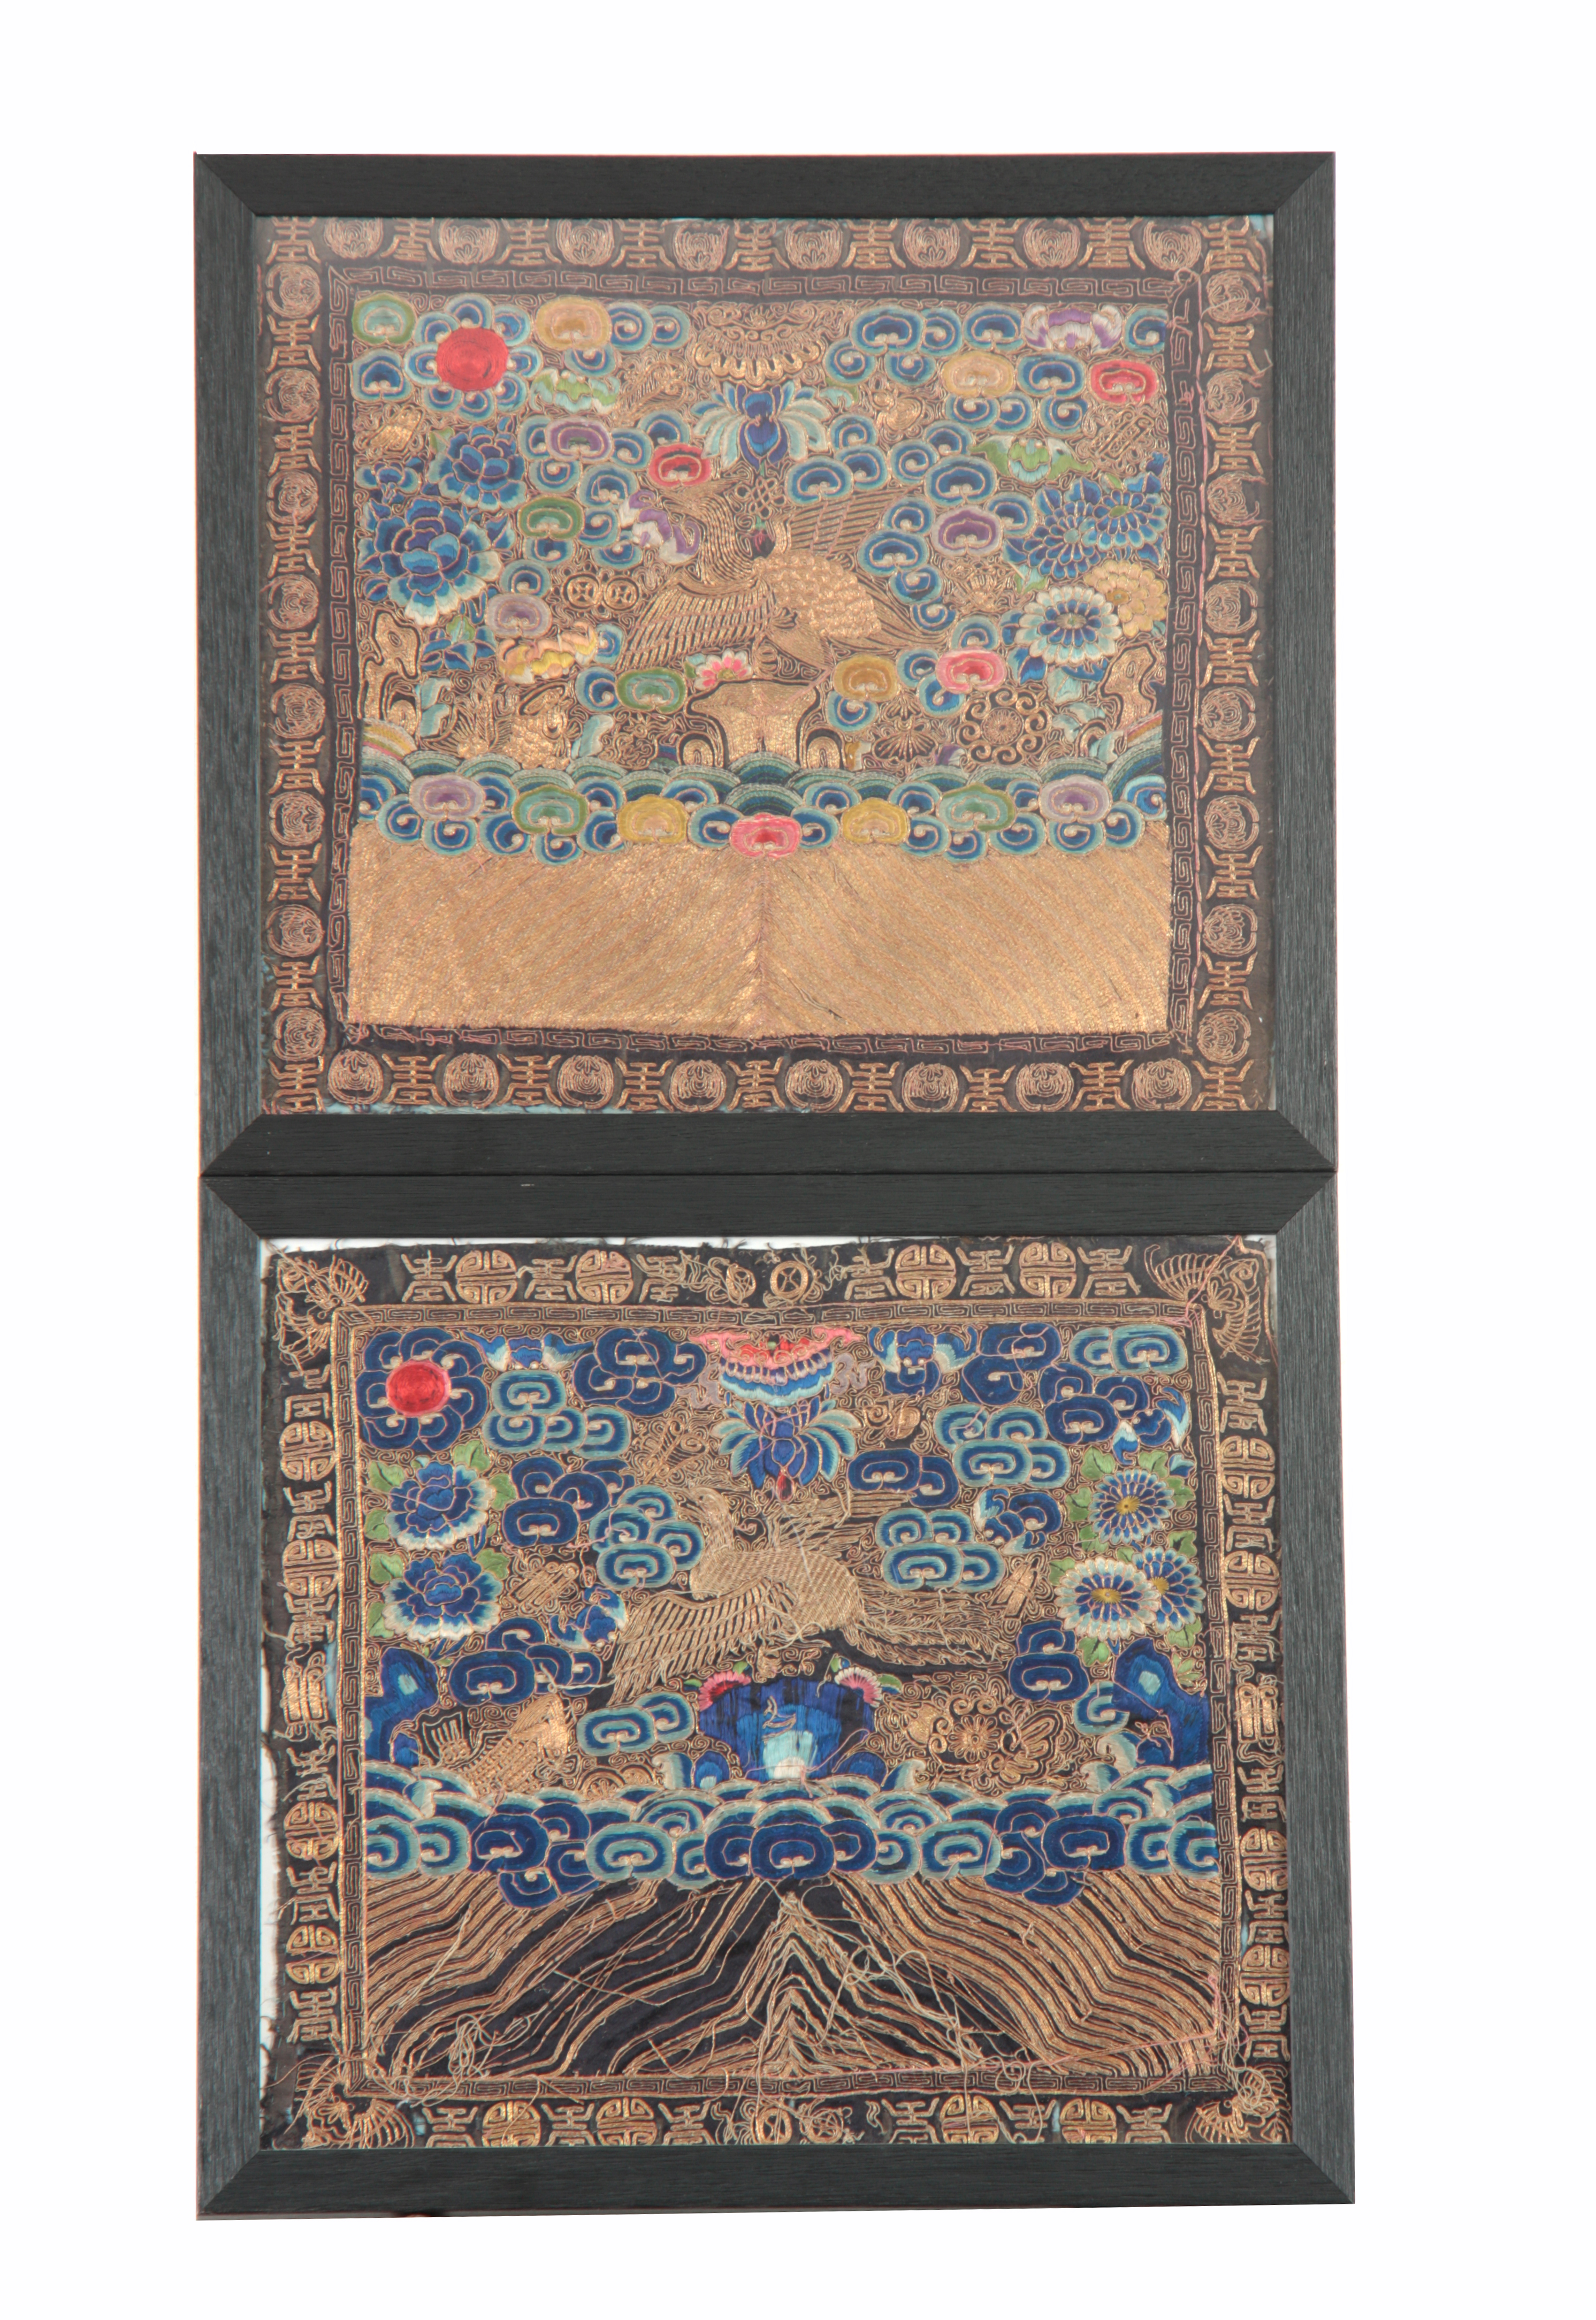 A PAIR OF LATE 19th CENTURY CHINESE SCHOLAR RANK BADGES having a fine gold thread depicting a Golden